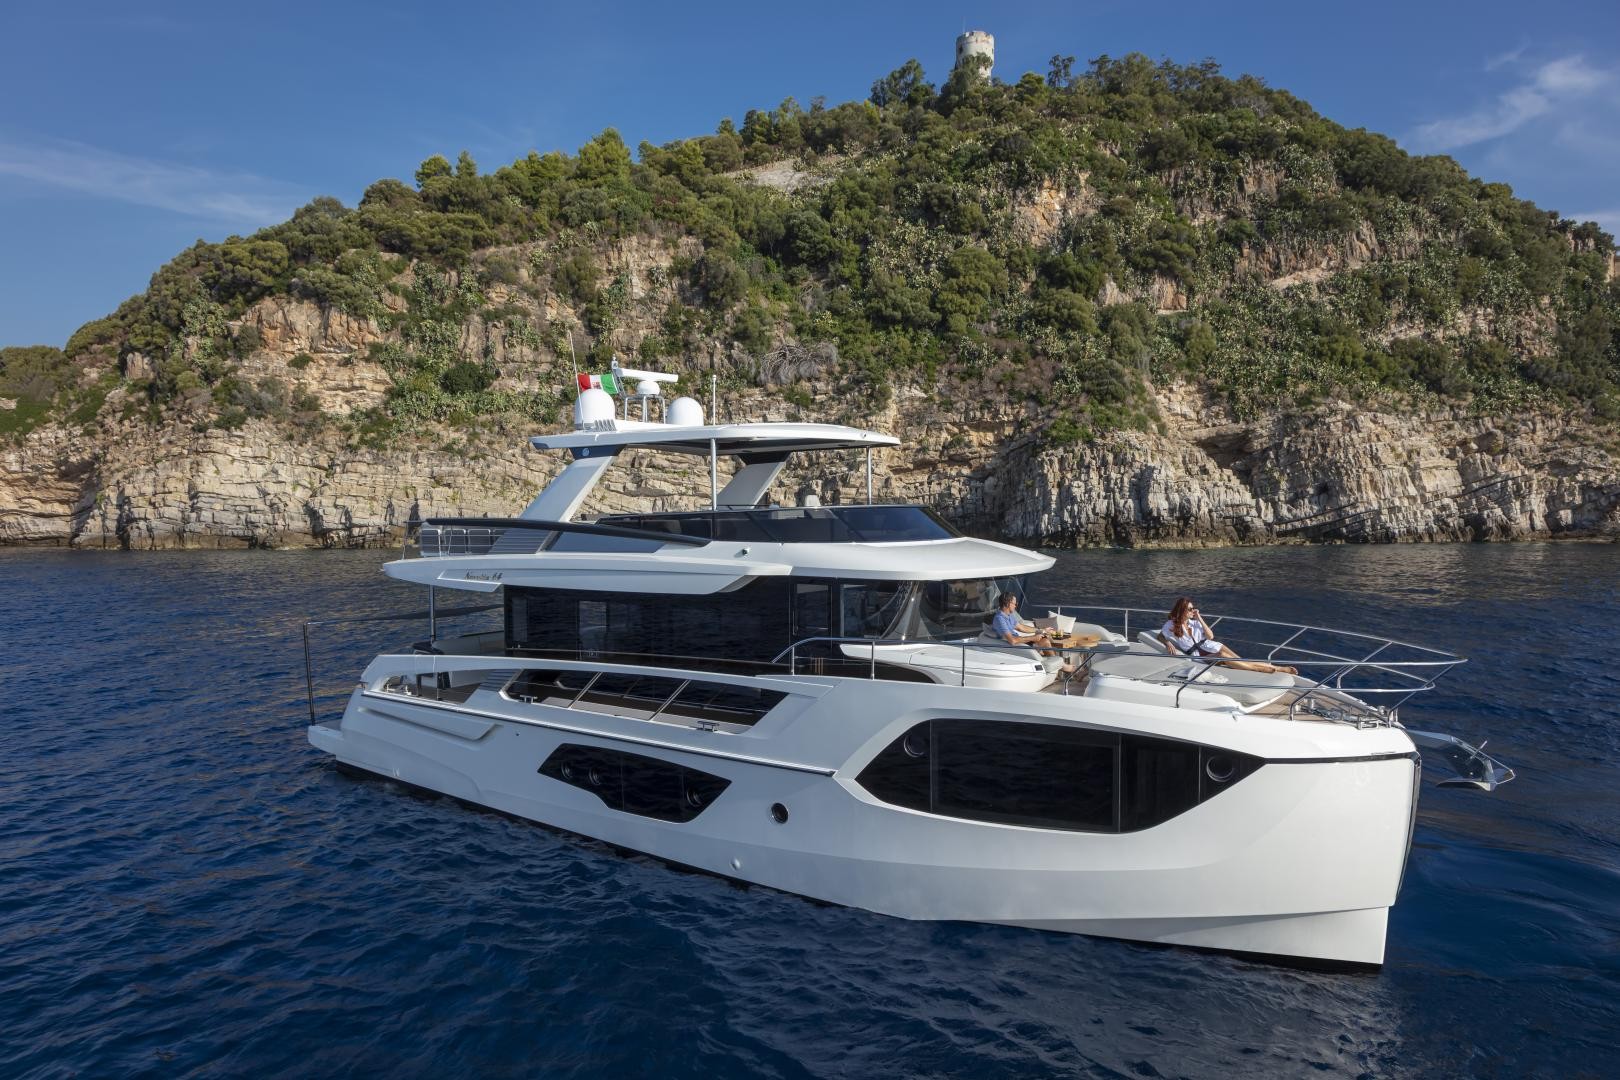 Best of Boats Award 2020: Absolute Navetta 64 – “Best for Travel”